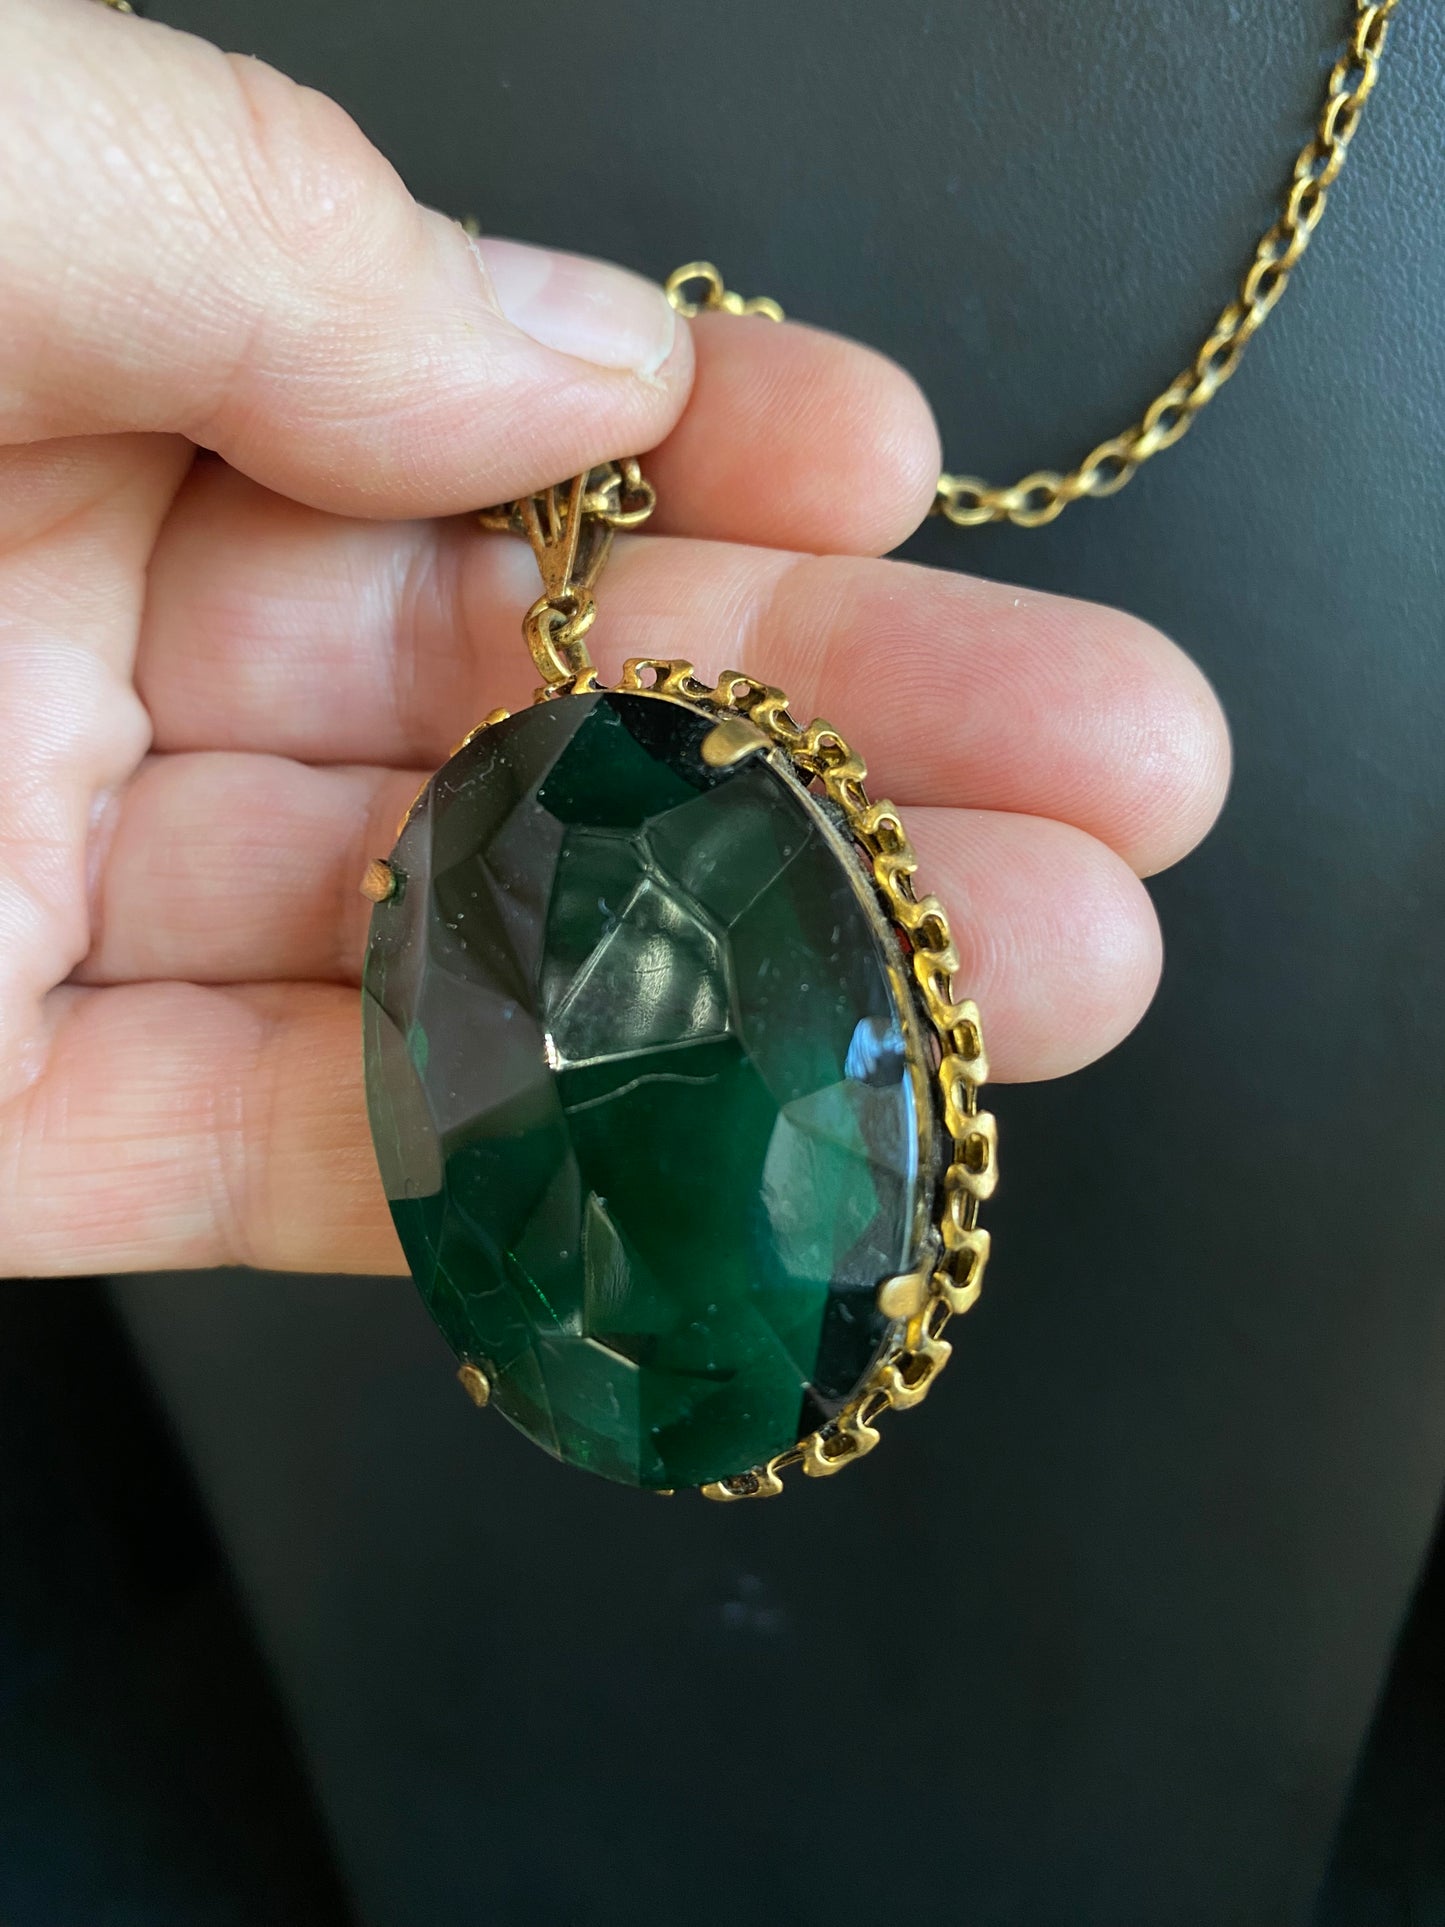 Vintage necklace with green glass pendant